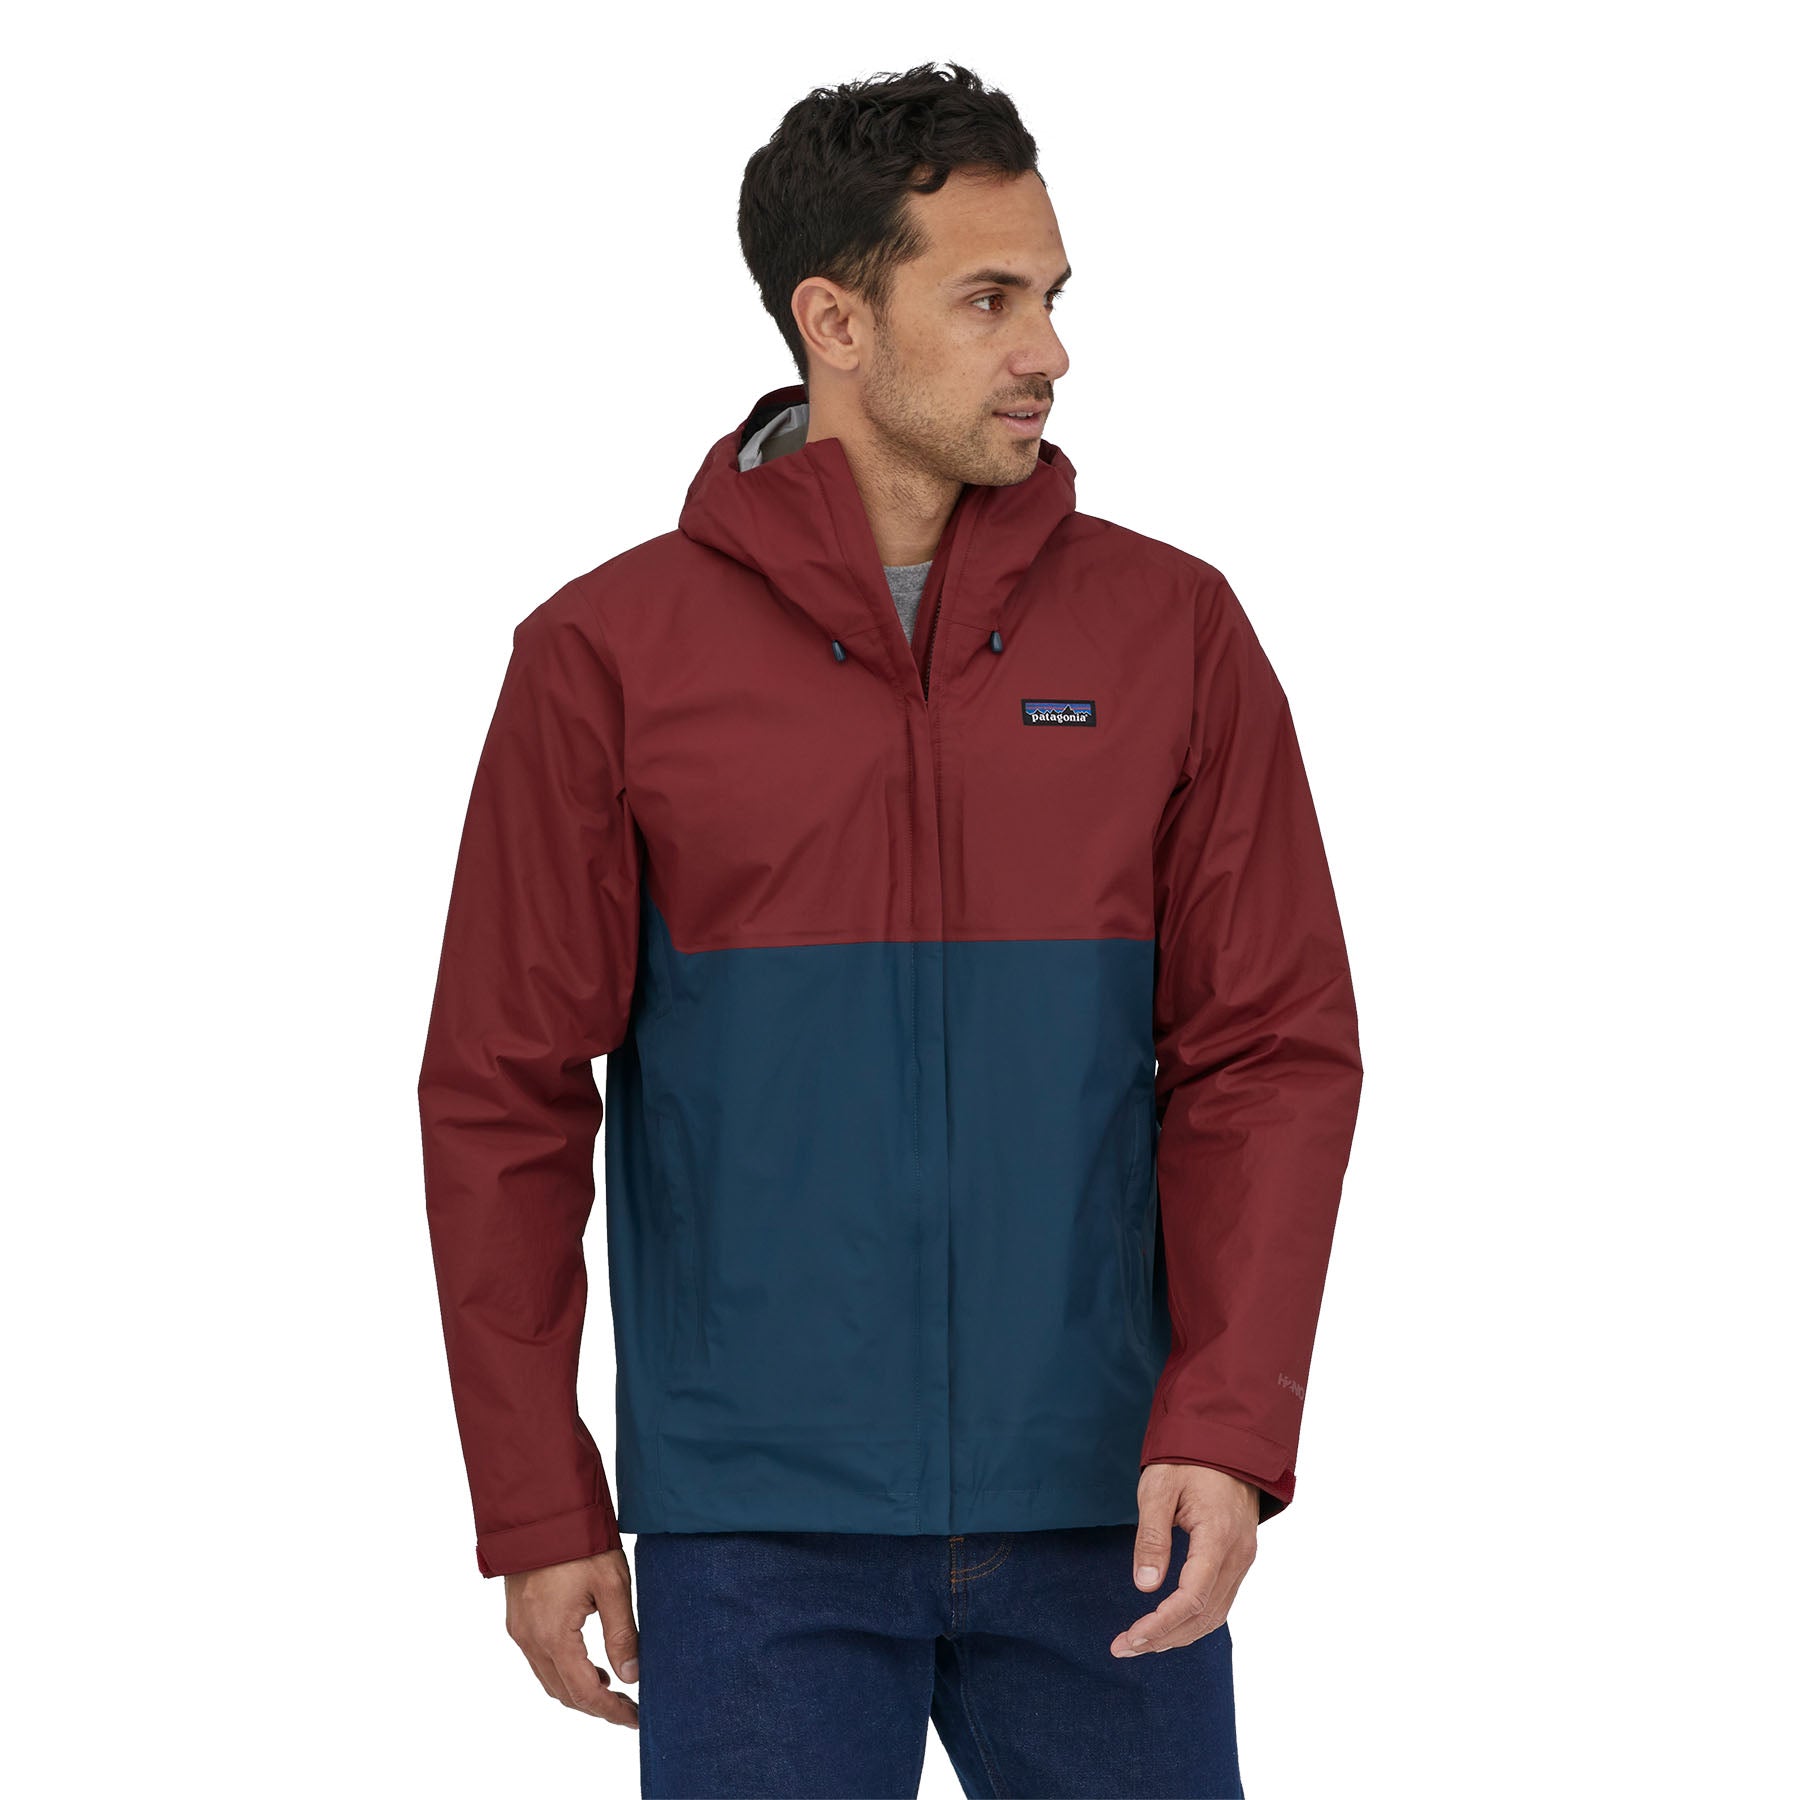 Patagonia M's Torrentshell 3L Jacket - Fin & Fire Fly Shop